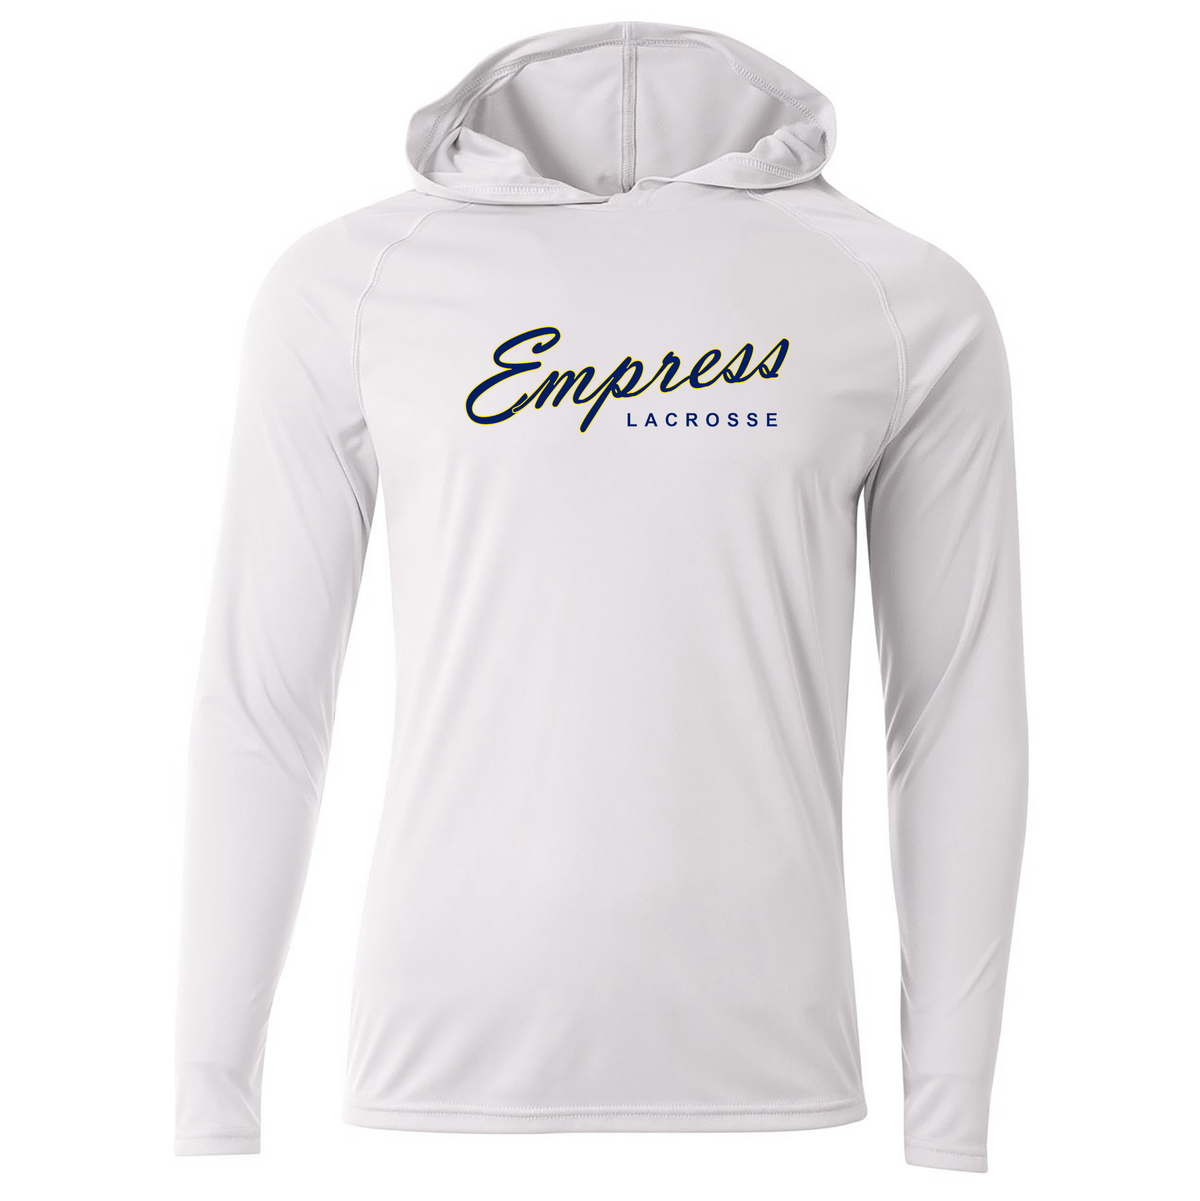 Empress Lacrosse A4 Cooling Performance LS Hooded Tee